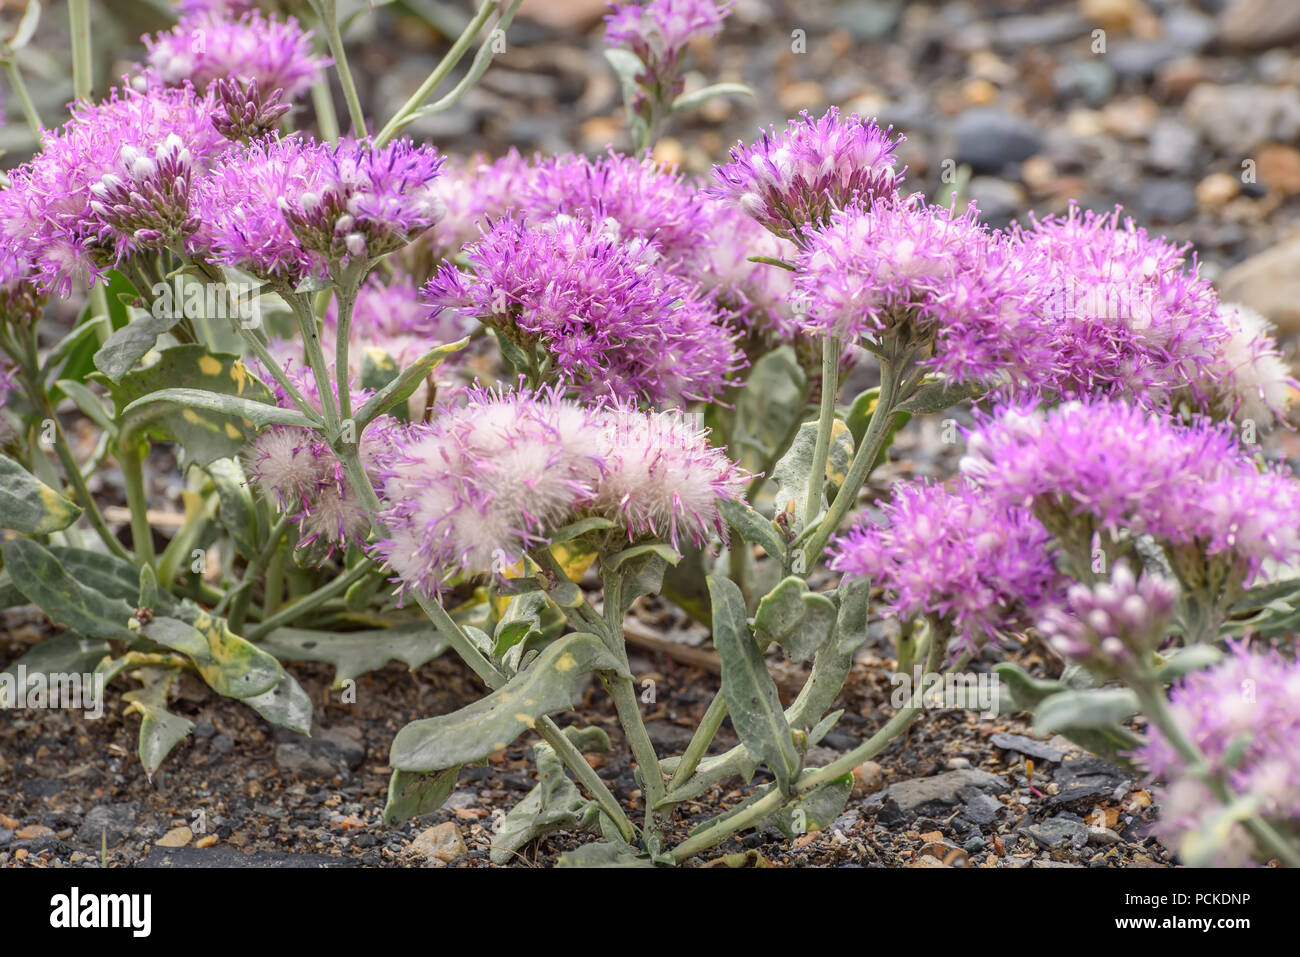 Beautiful fluffy pink flowers Saussurea Kuschakeviczii growing on stones in the steppe close-up Stock Photo